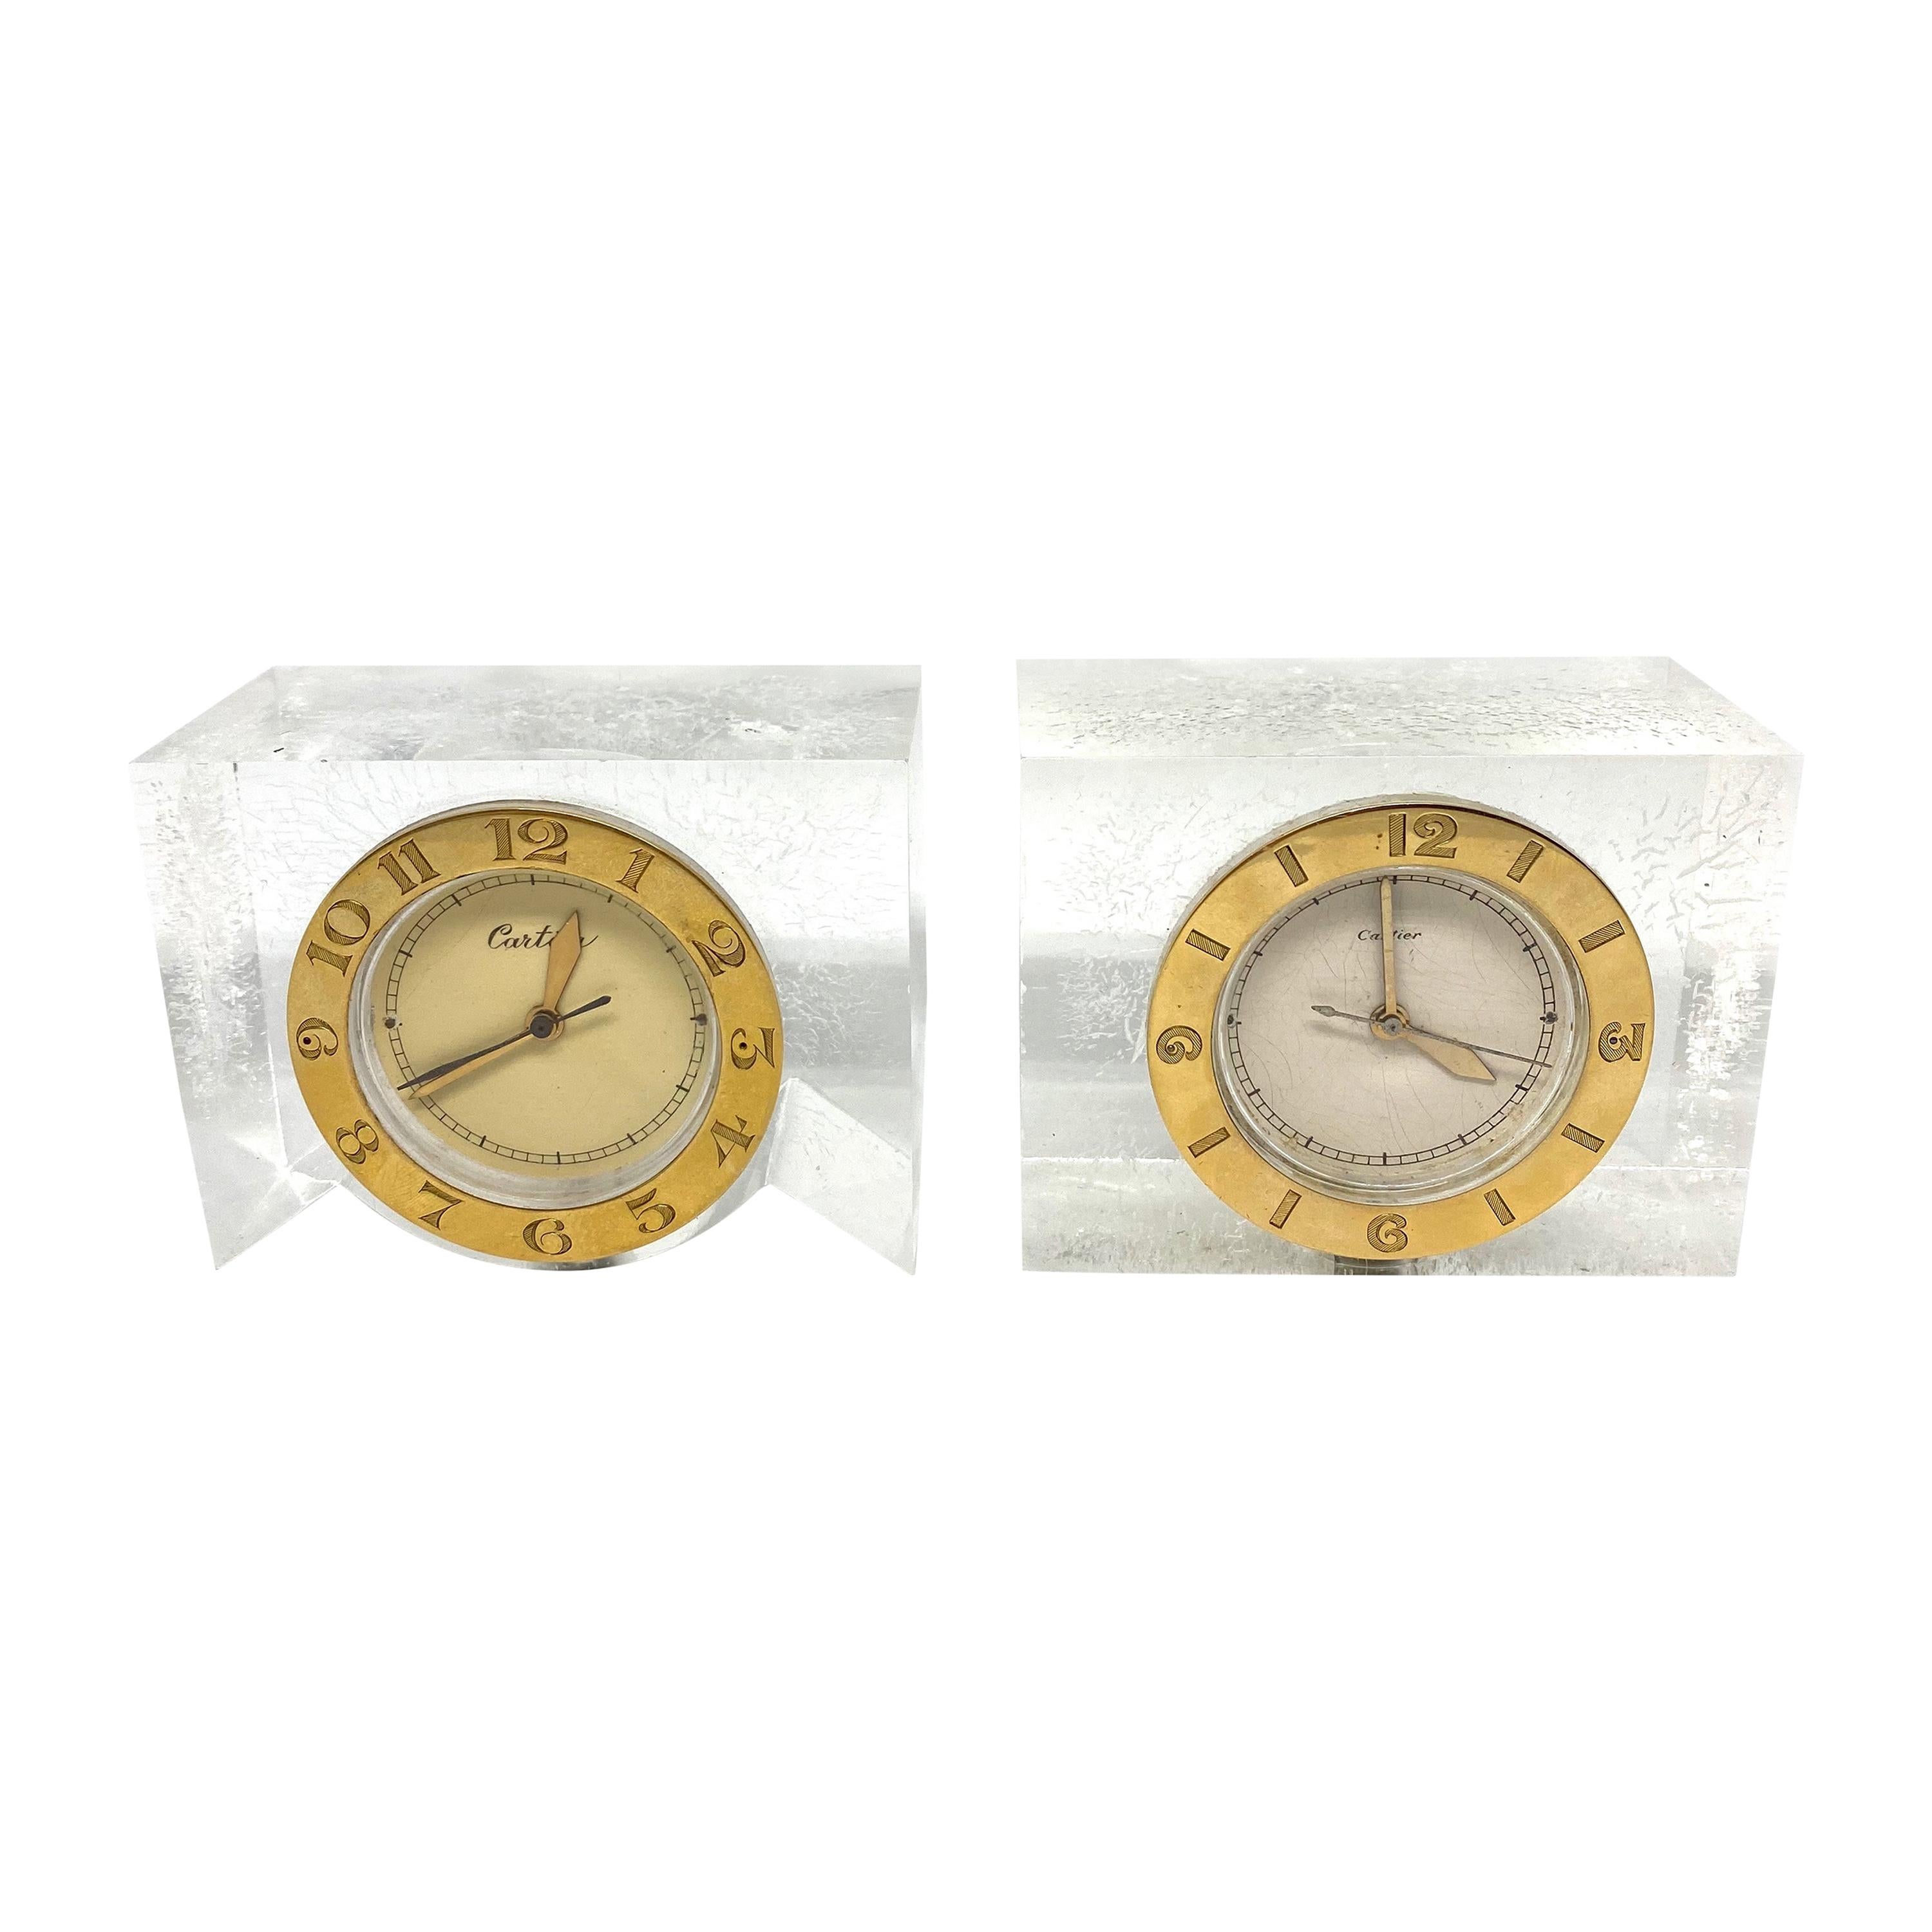 1950s Cartier Yellow Gold and Lucite Pair of Desk Clocks w/ Lecoultre Movement